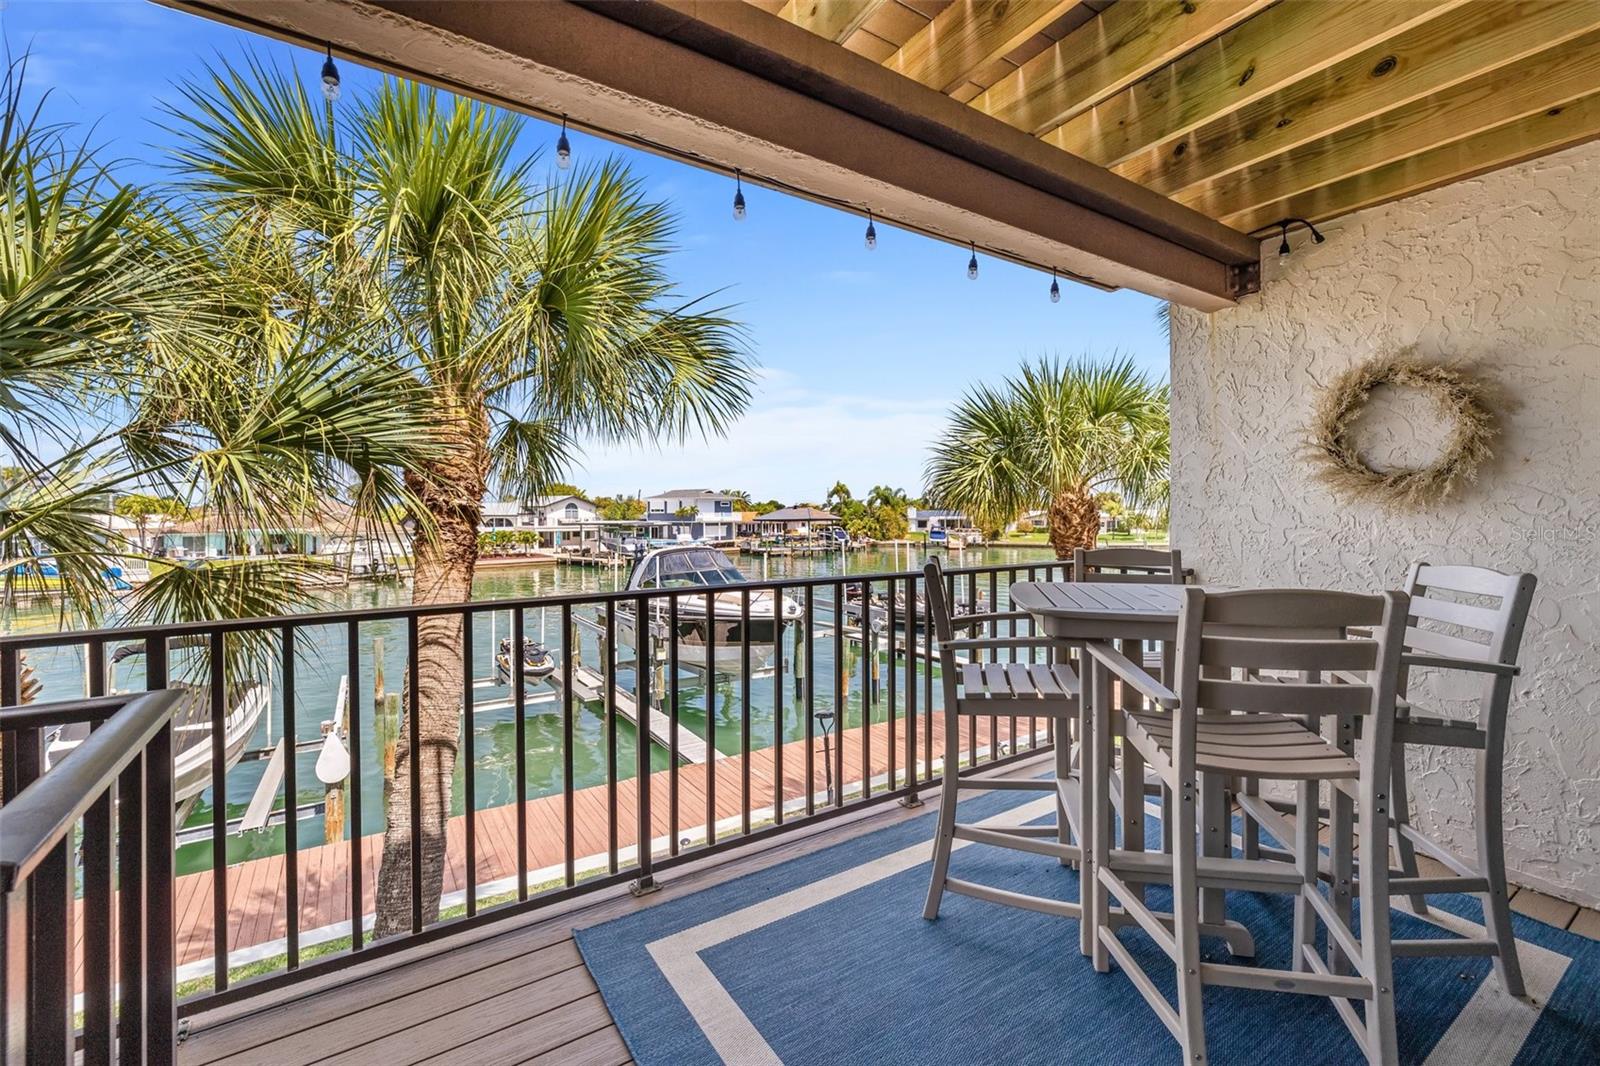 Second Floor Balcony With Water View